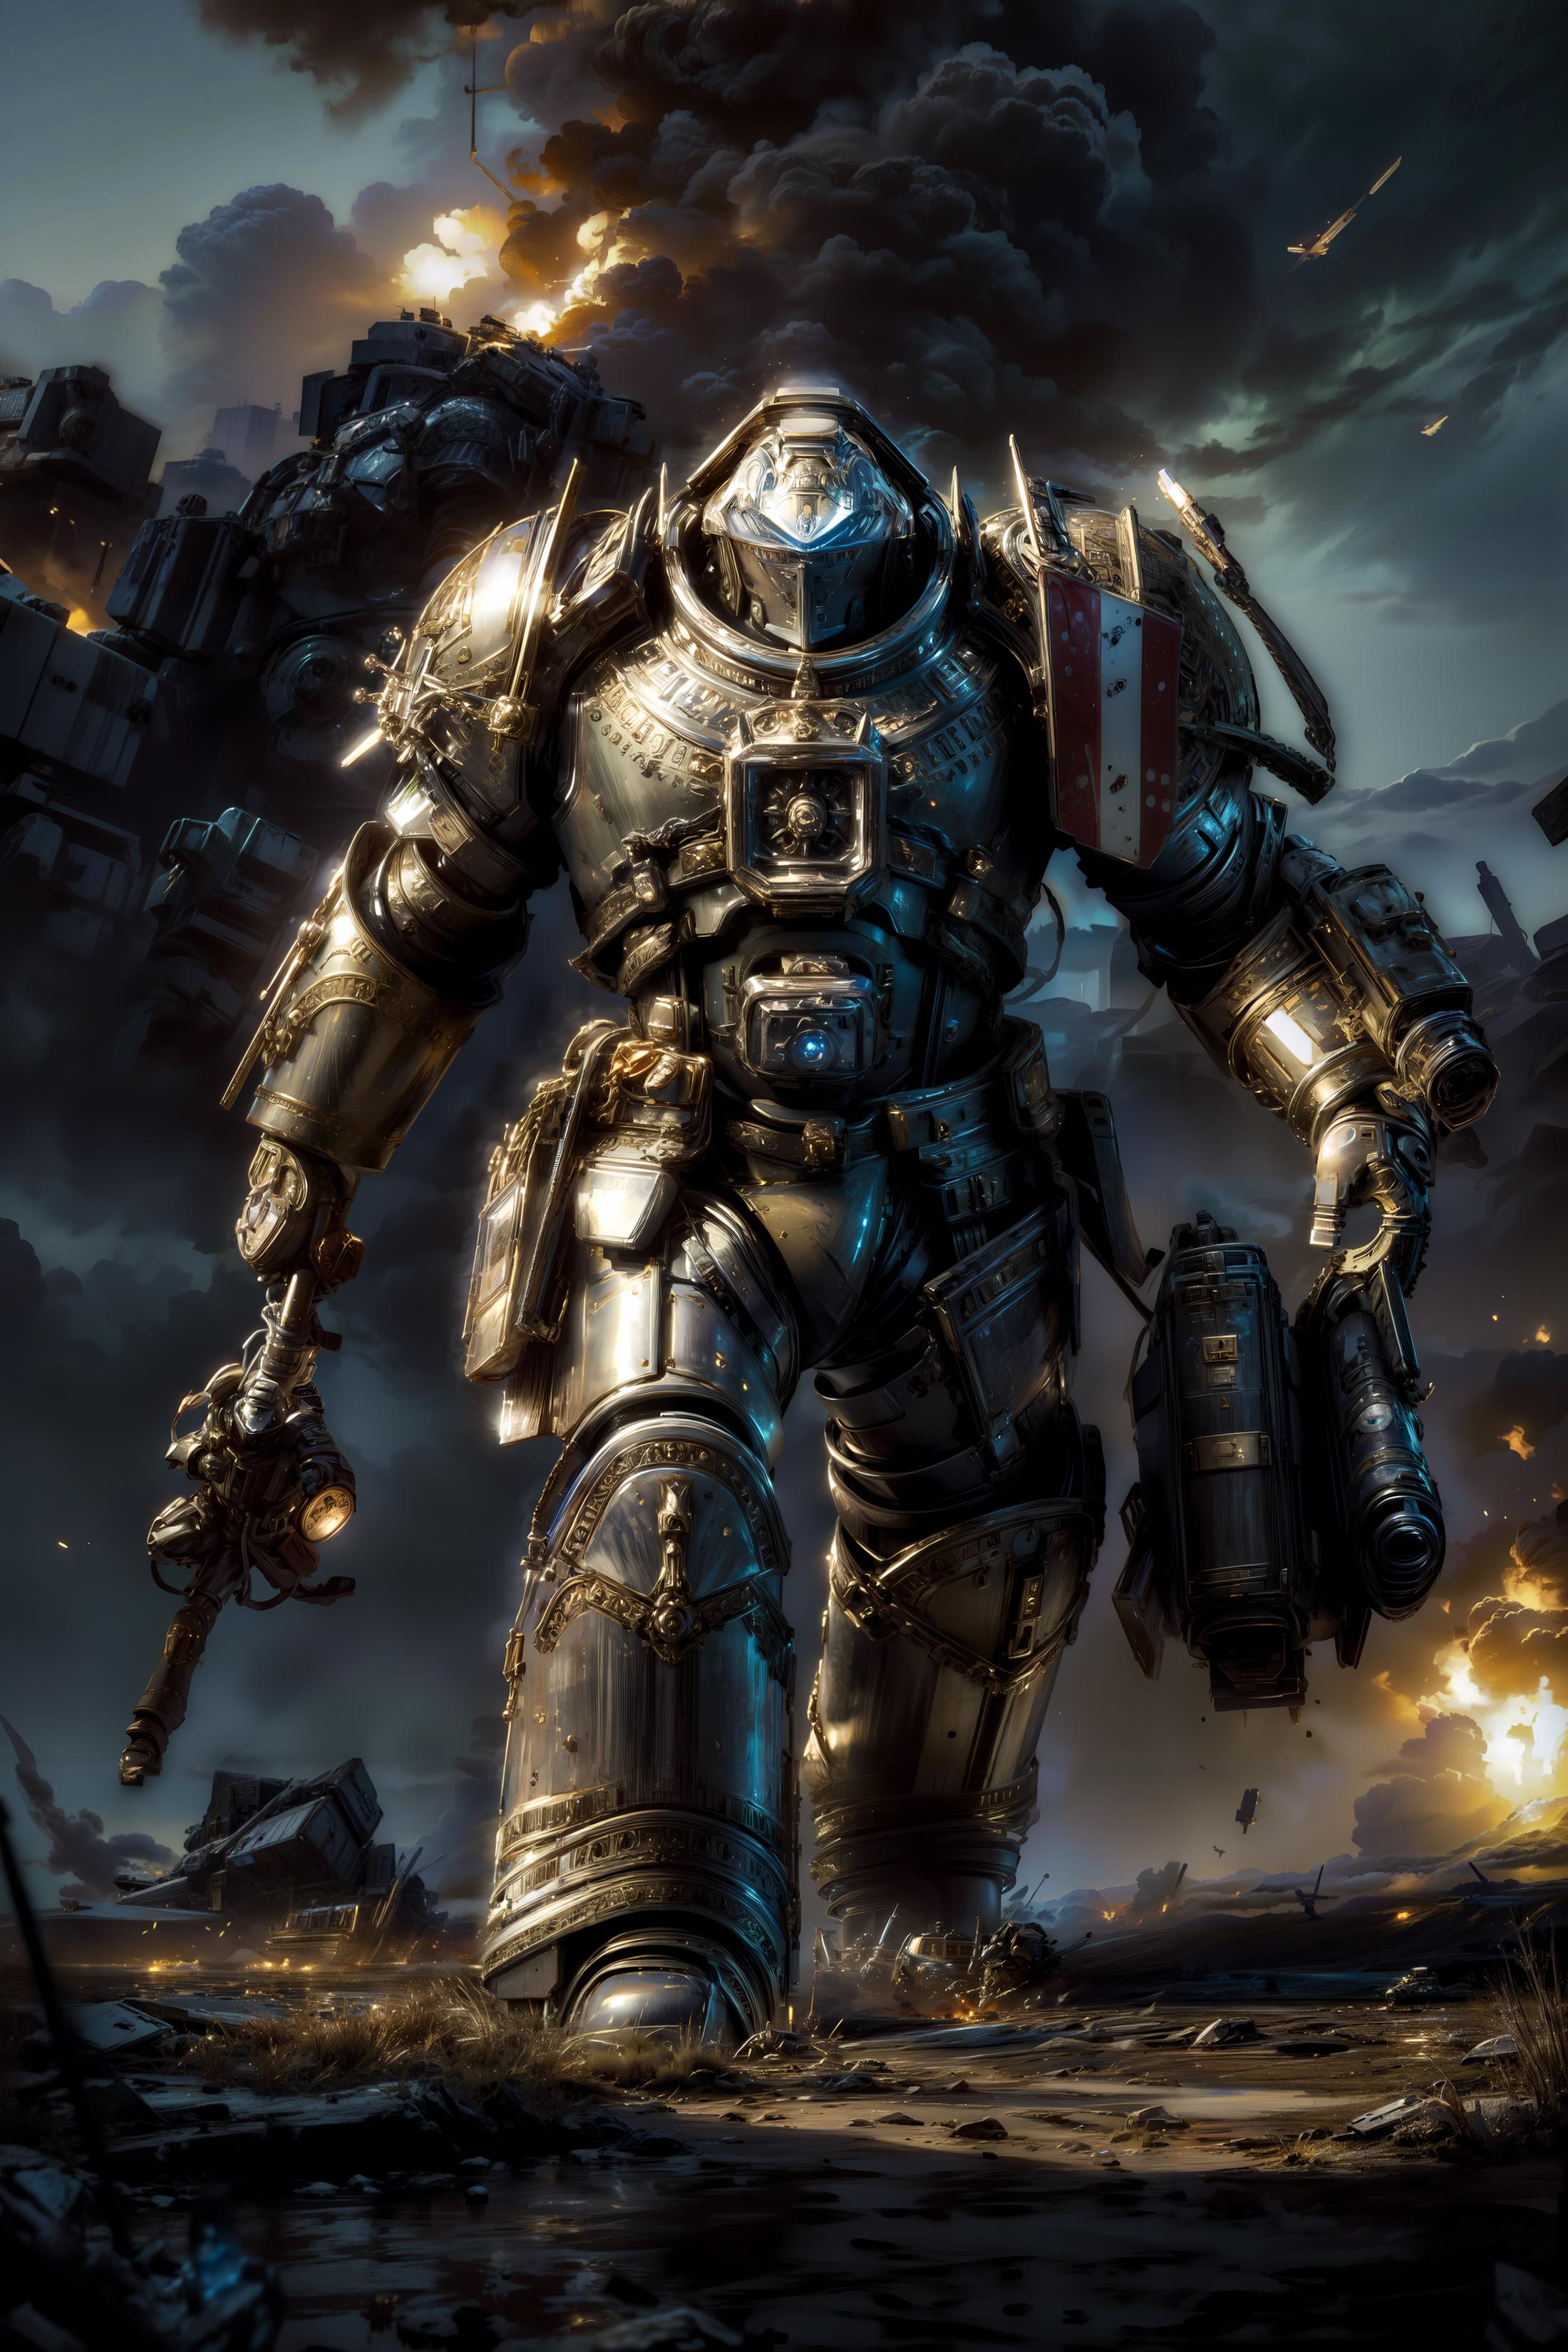 A warrior in a metal suit, armed with a gun and a sword, stands in front of a dark and ominous sky.